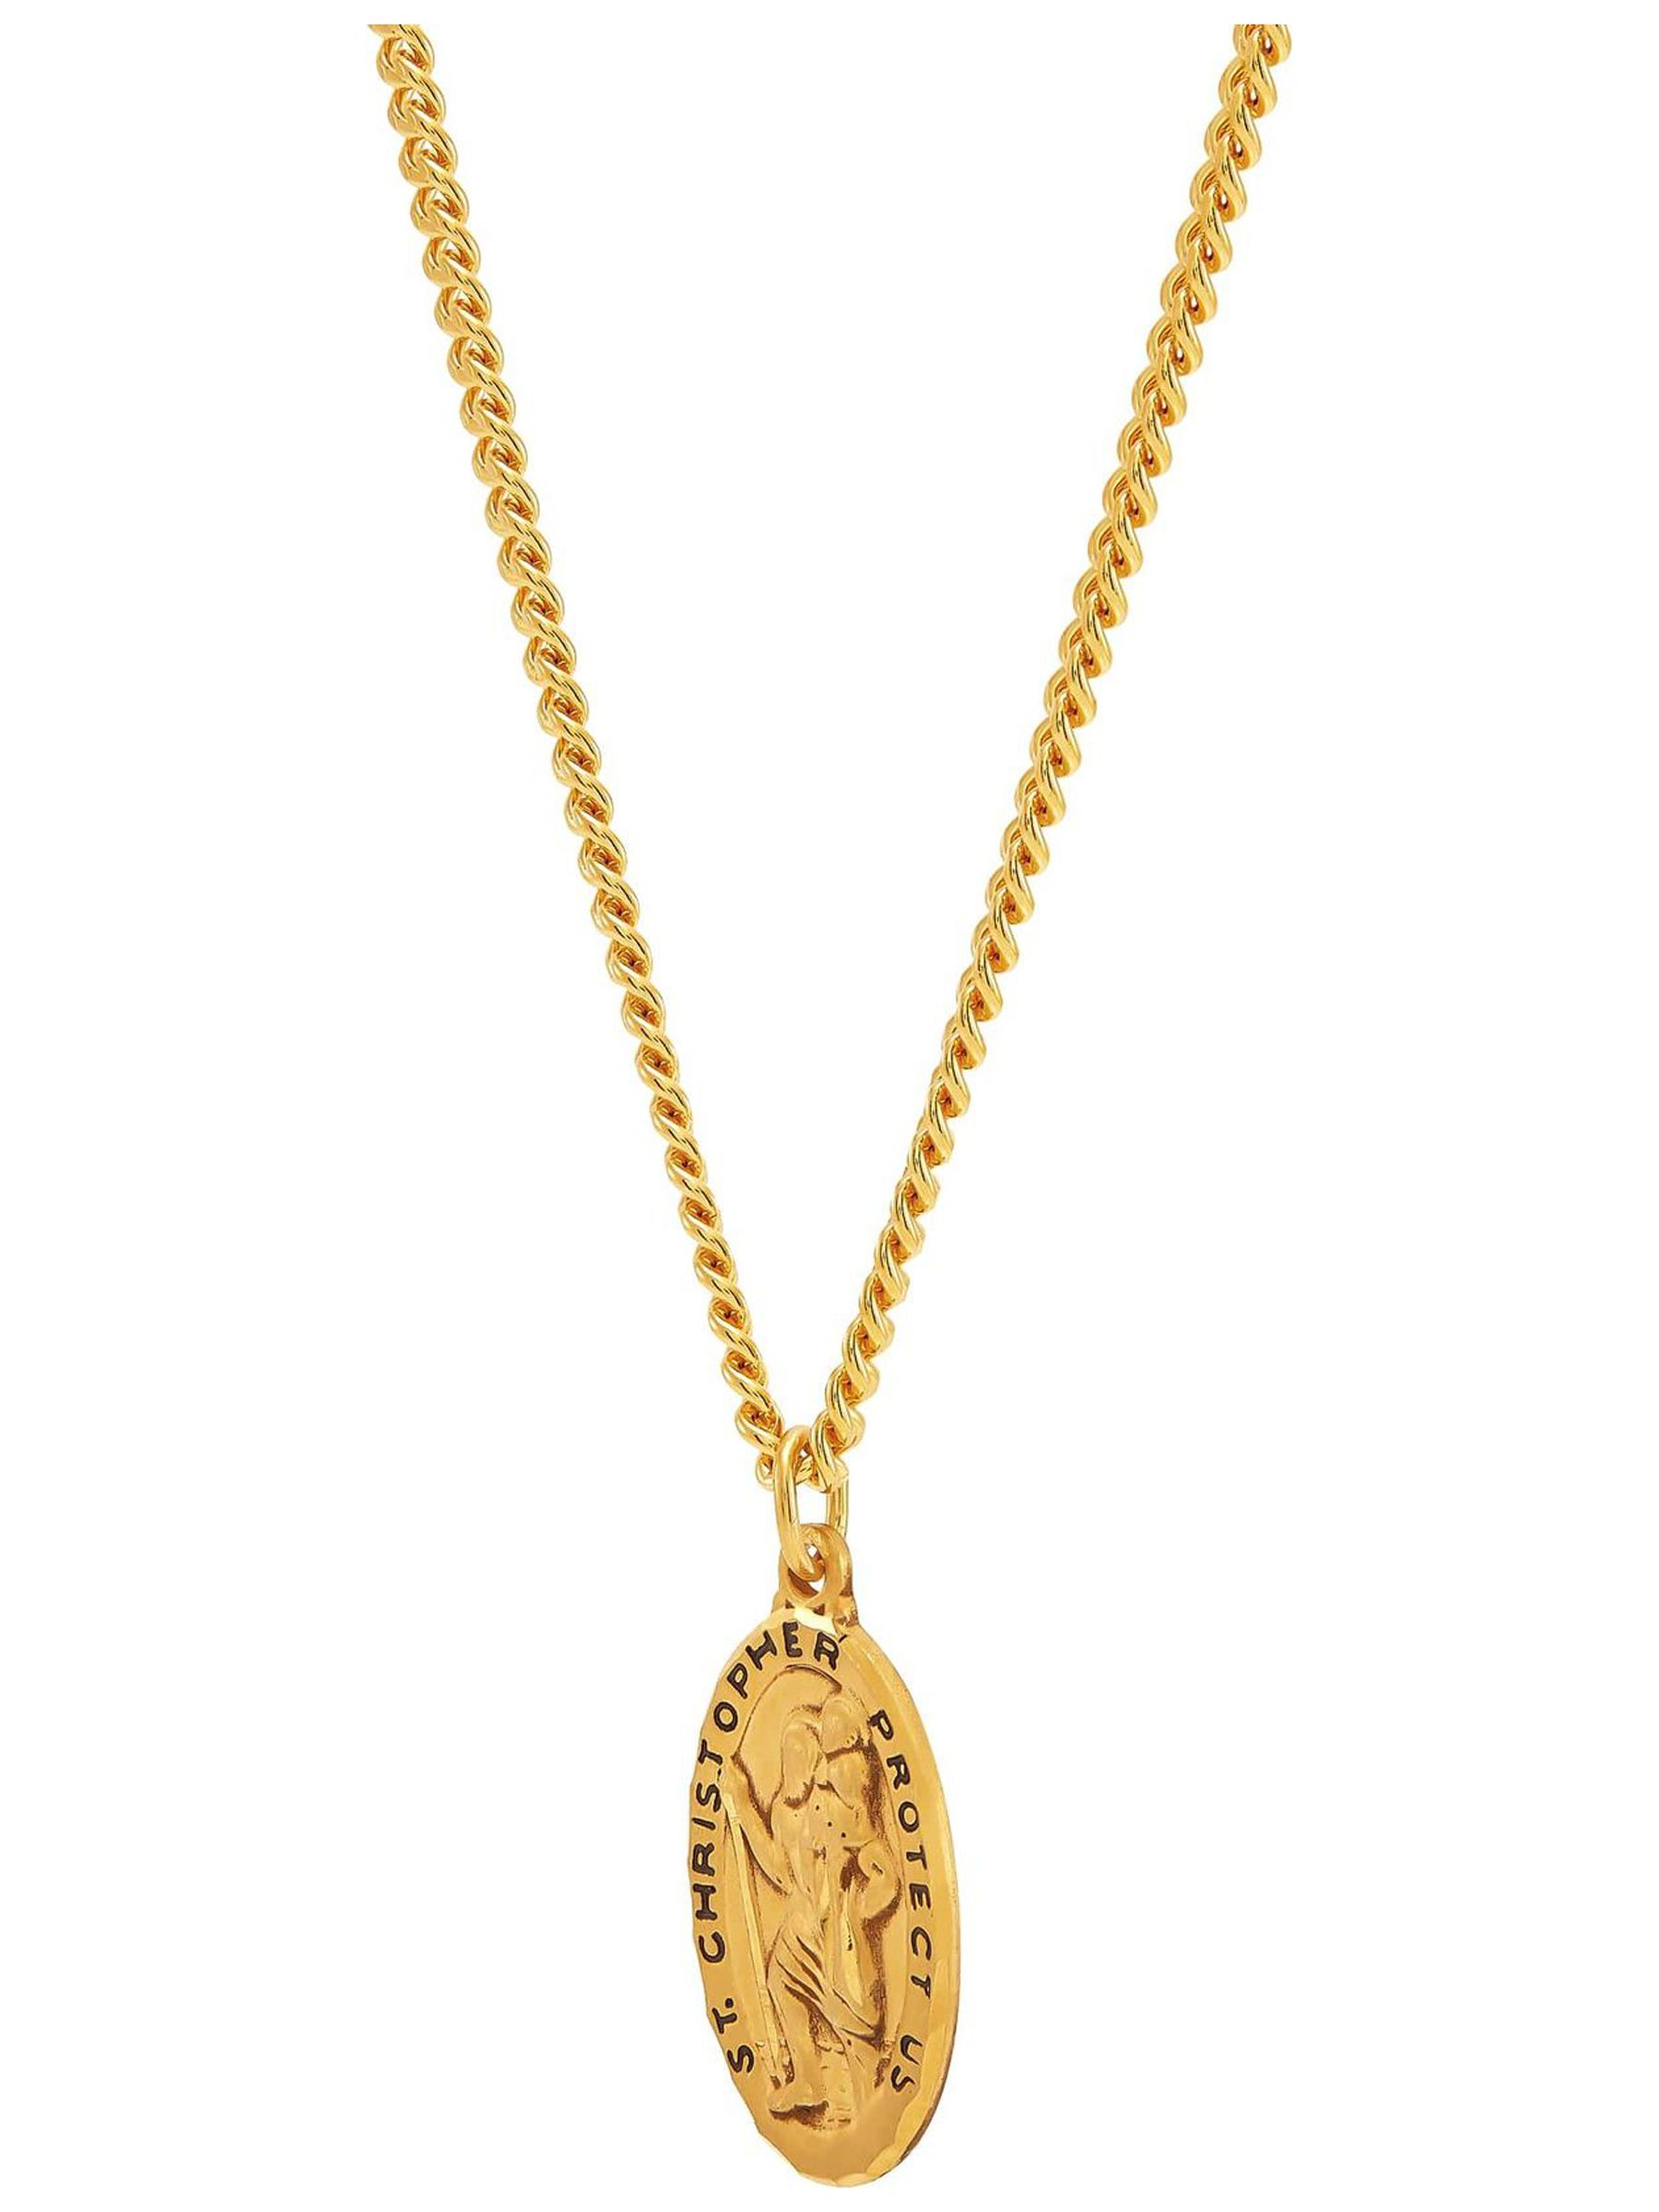 Finecraft 'St. Christopher Medallion Necklace' in Gold-Plated Sterling Silver & Stainless Steel, 24" - image 4 of 5